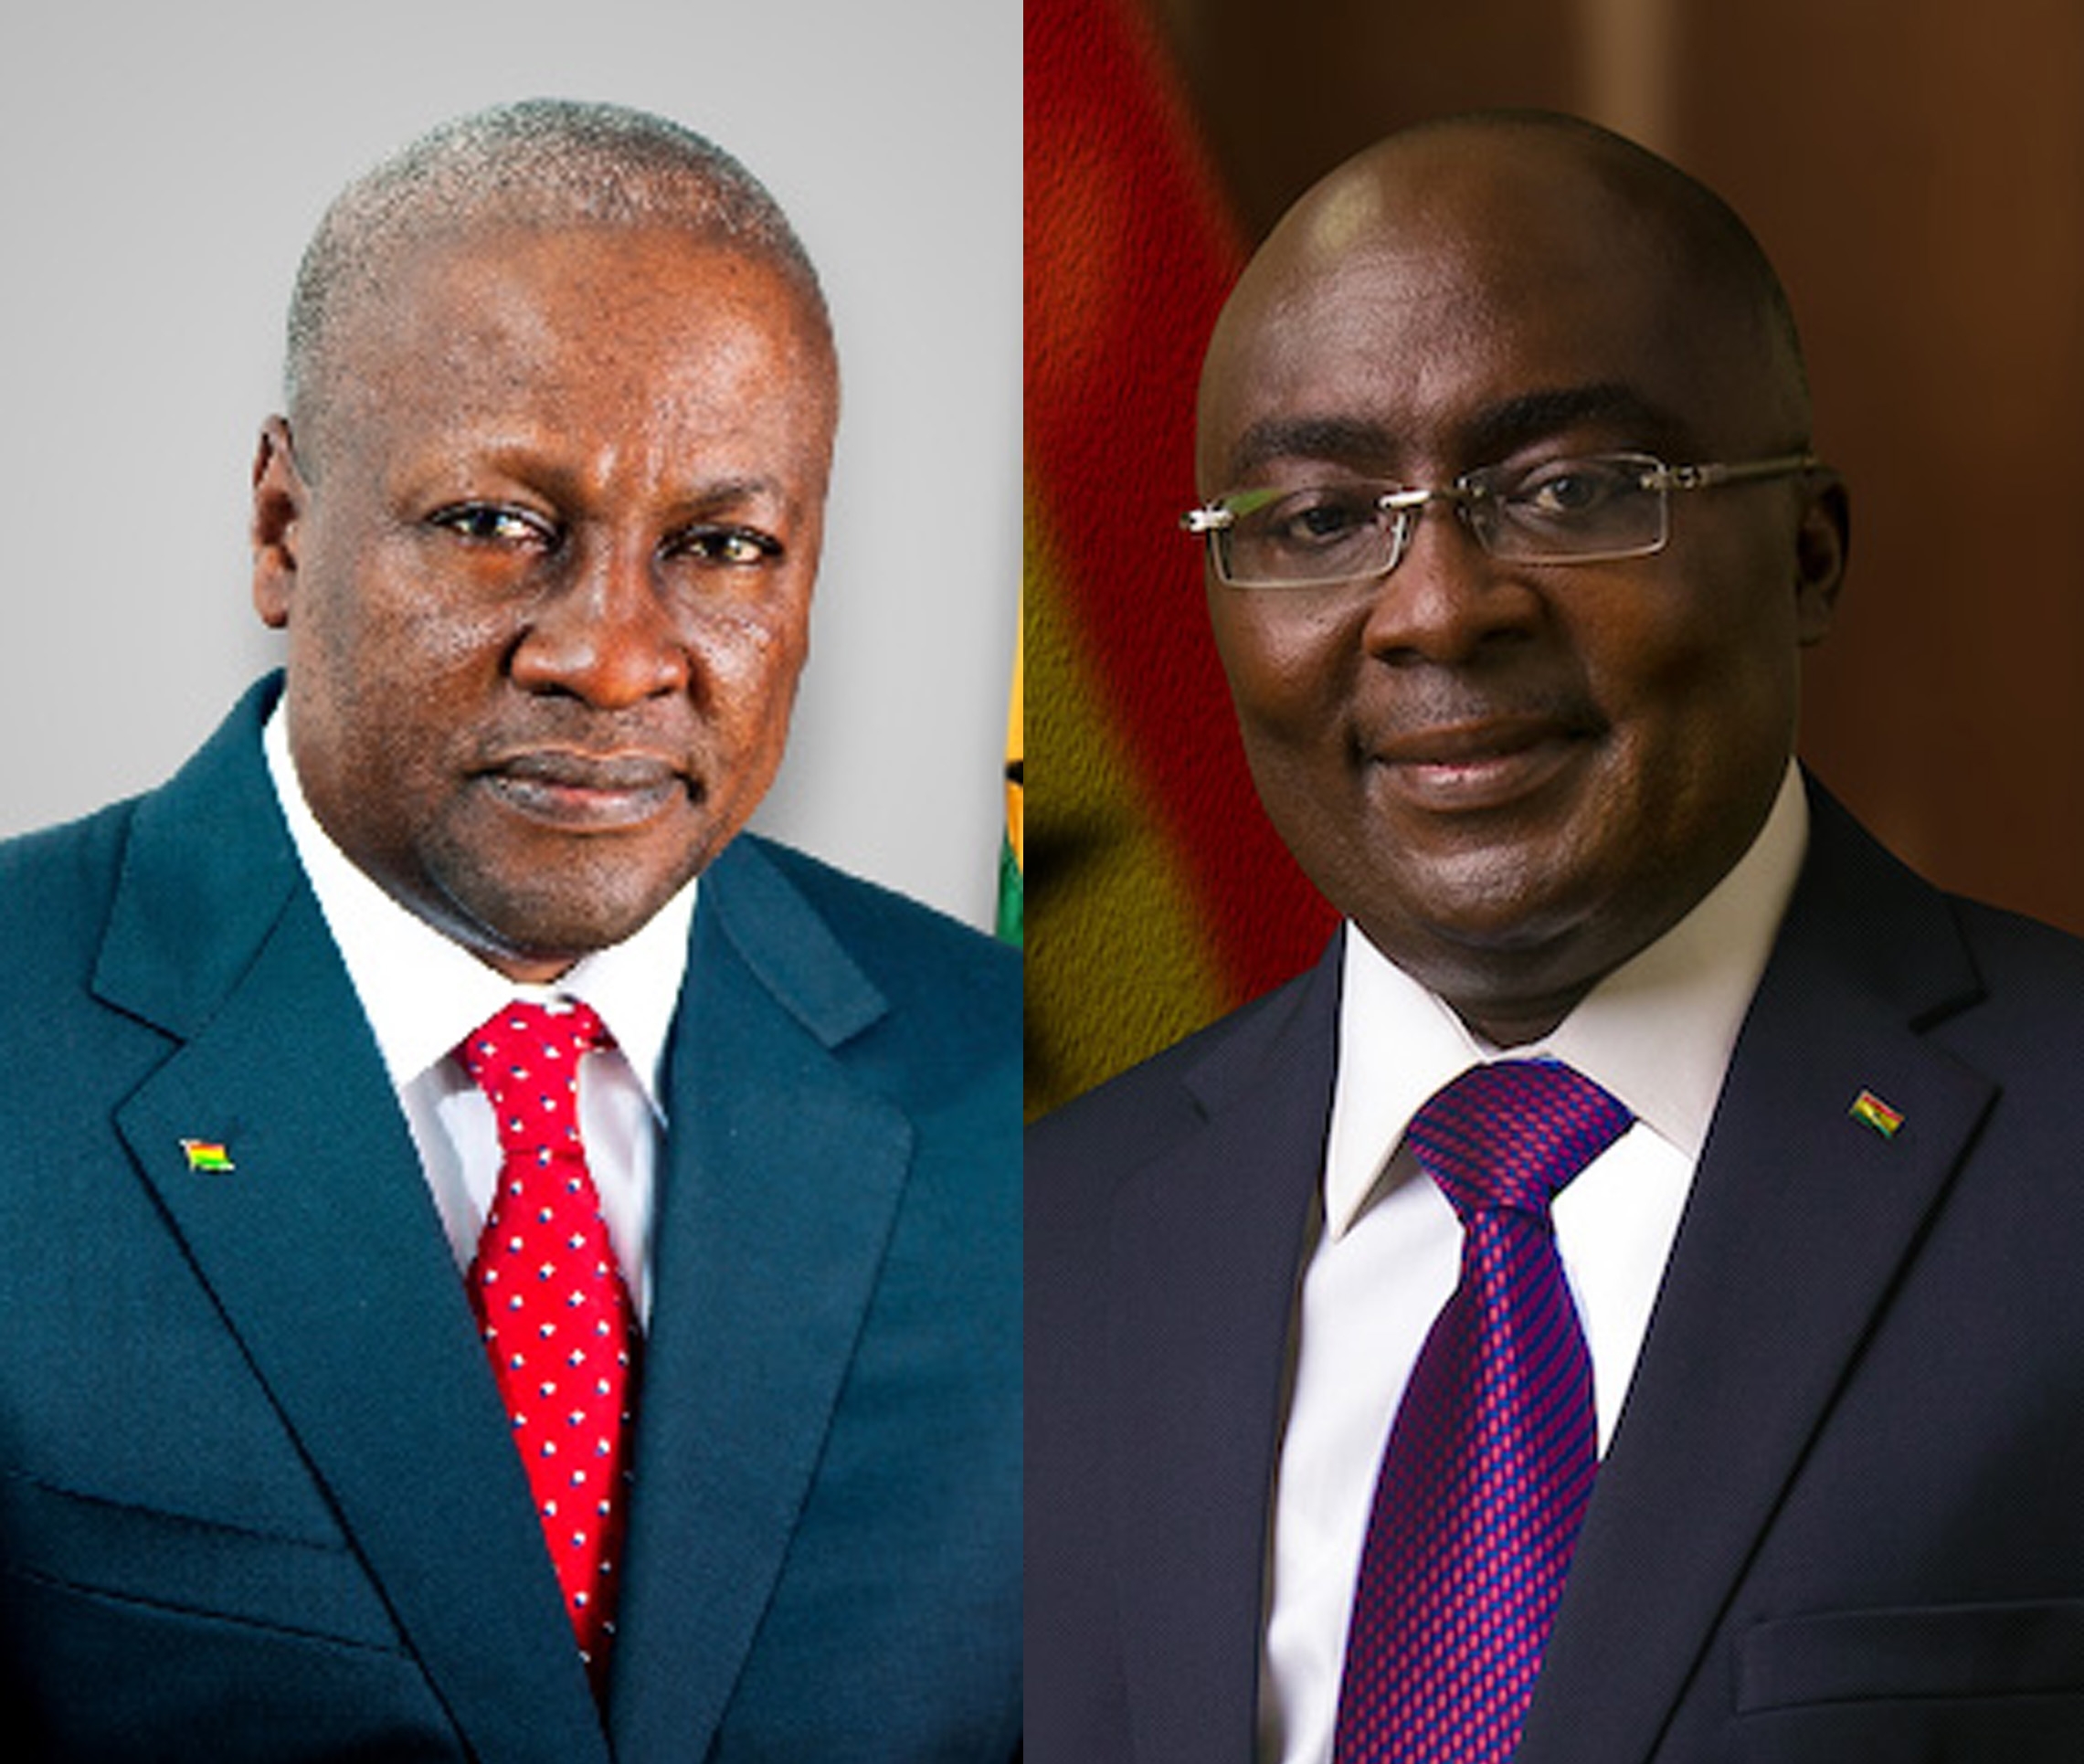 John Mahama leads Bawumia in latest poll, holds strong coalition